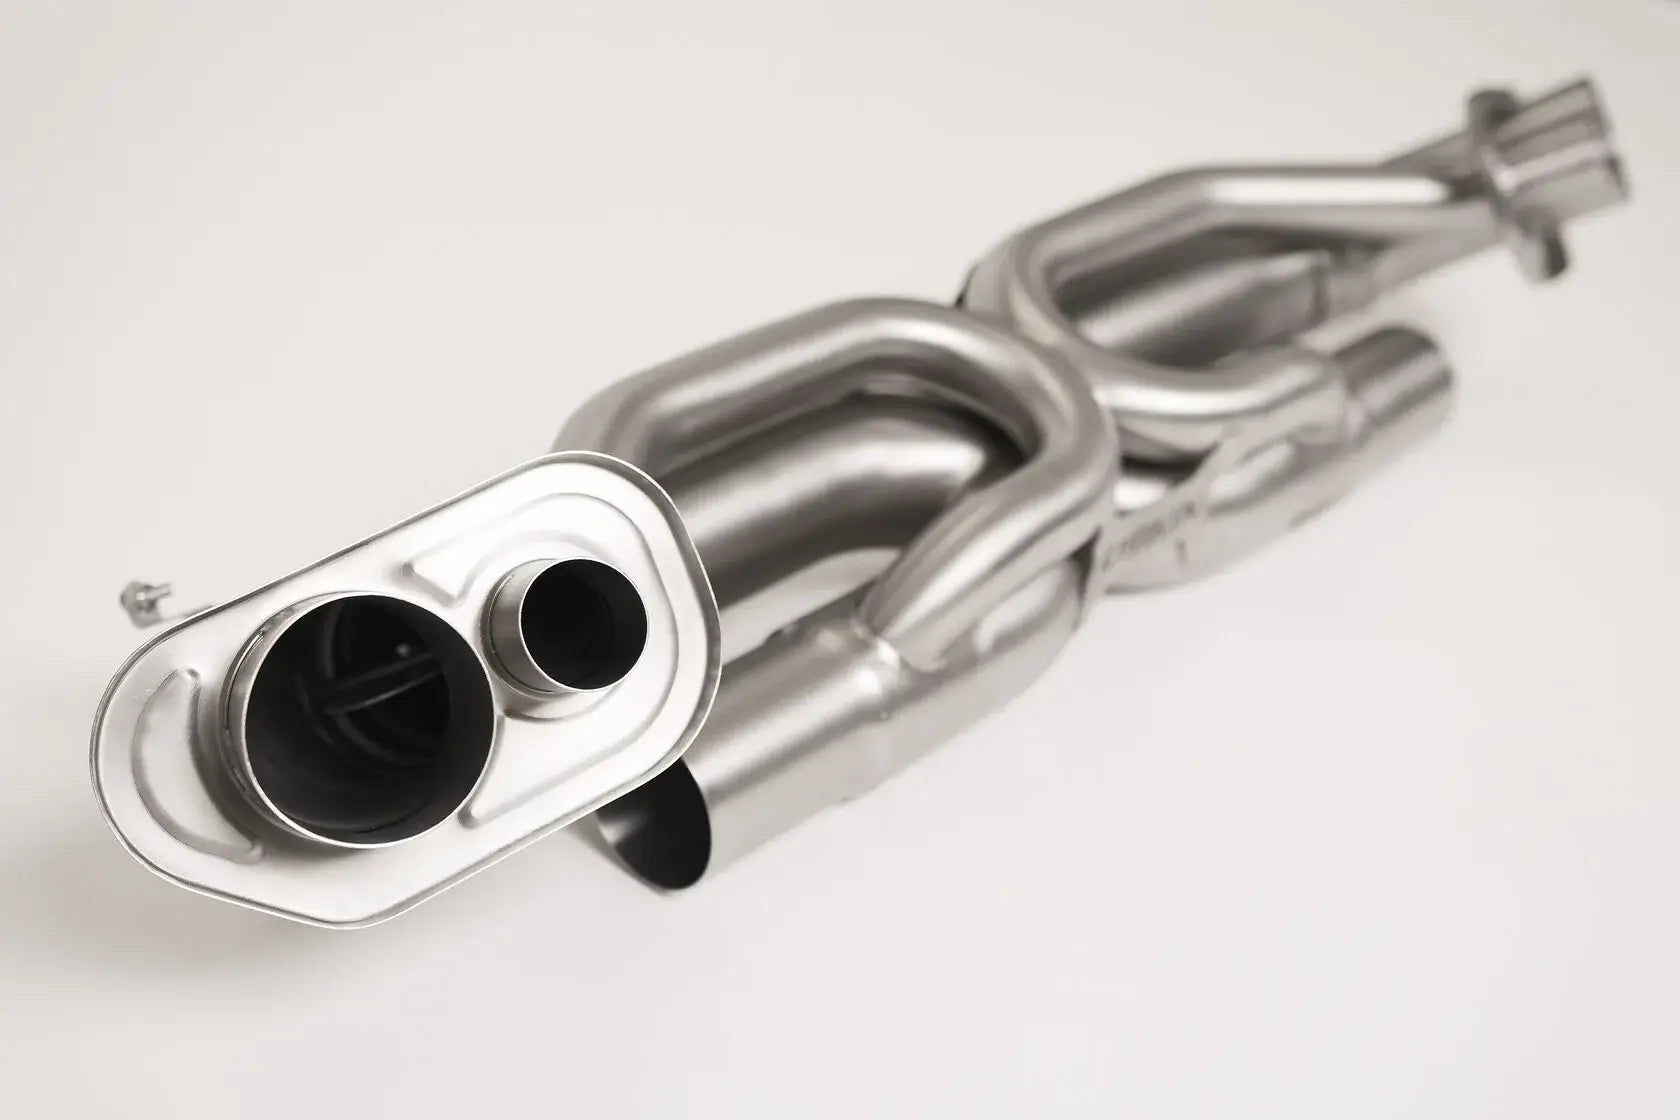 DEIKIN 10-PO.911.T/TS.992.R-ES-DP-Ti-00 Exhaust system "Race" Titan for Porsche 911 Turbo/Turbo S (992) complete with downpipes without HeatShield Photo-6 